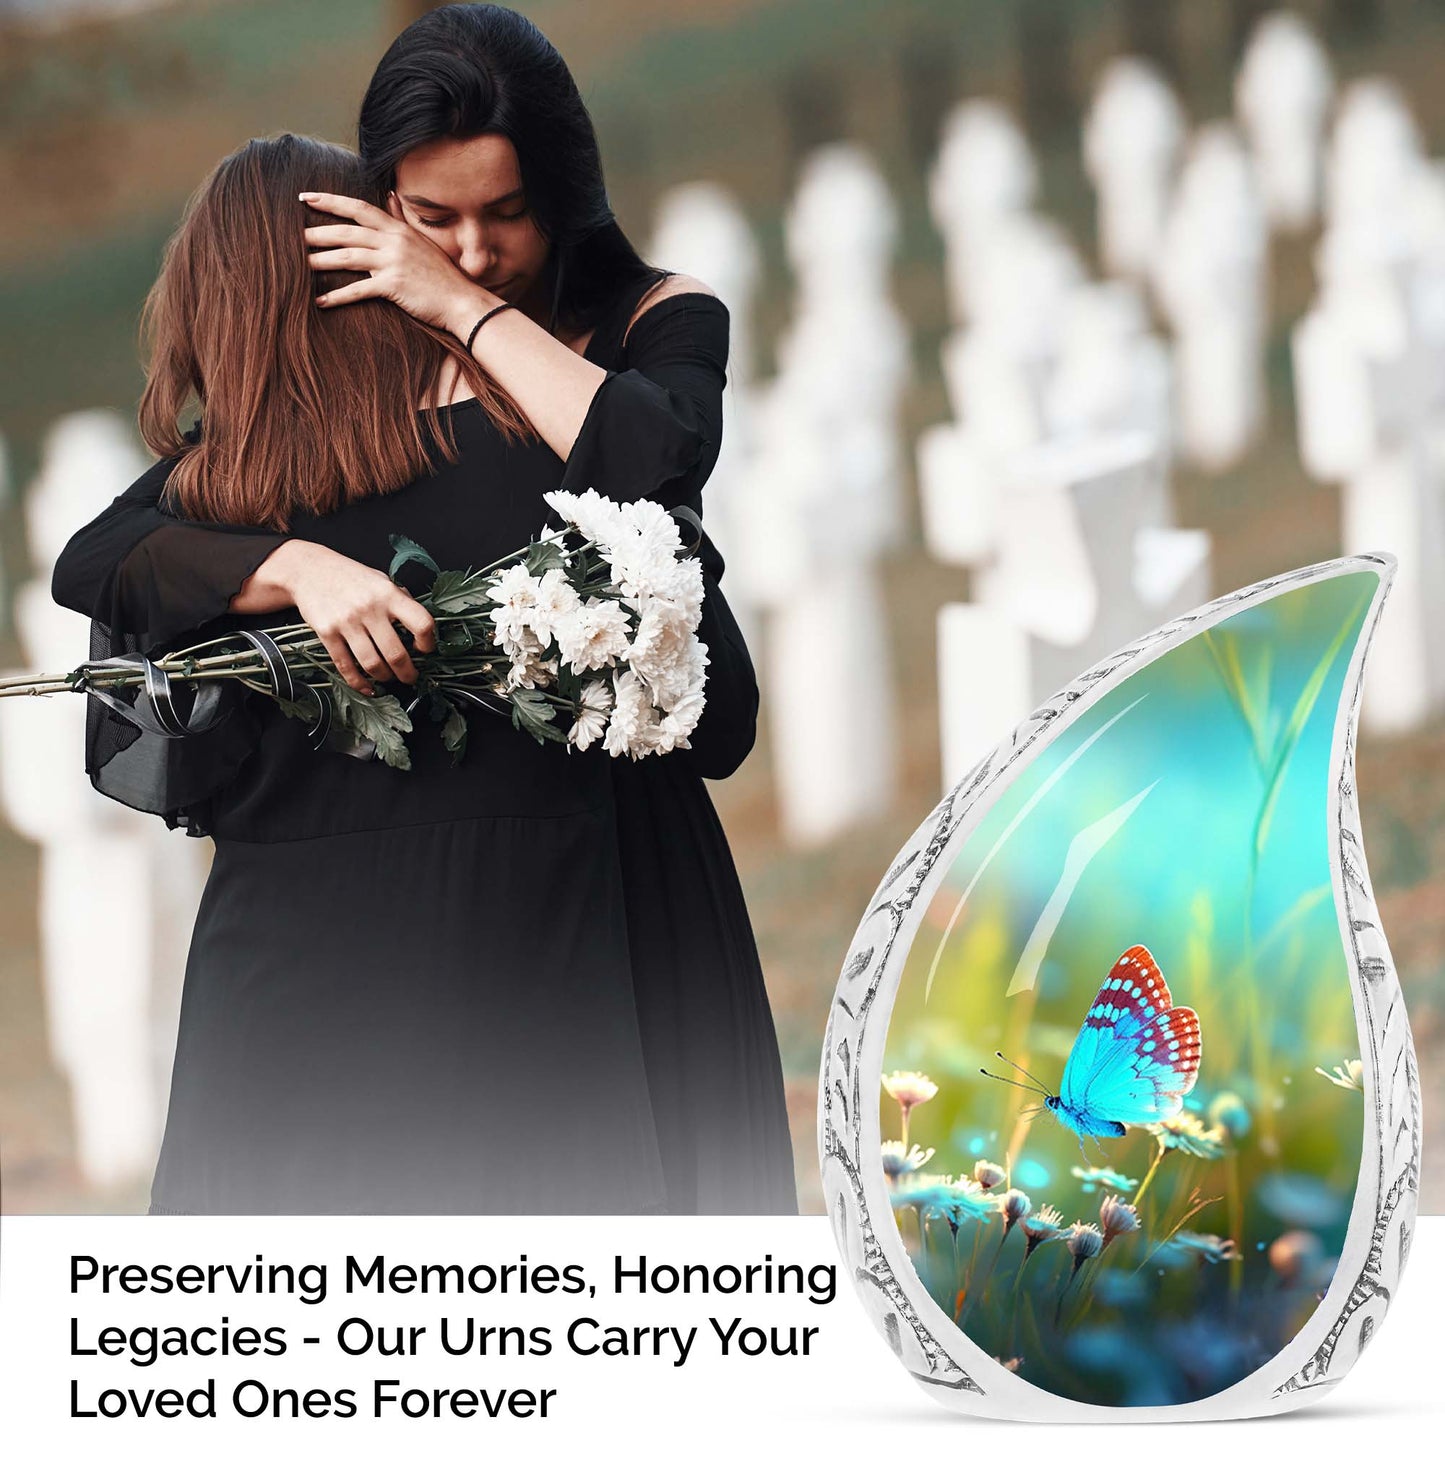 Large cremation urn for adults, featuring a unique butterfly design in a meadow, perfect metal container for ashes